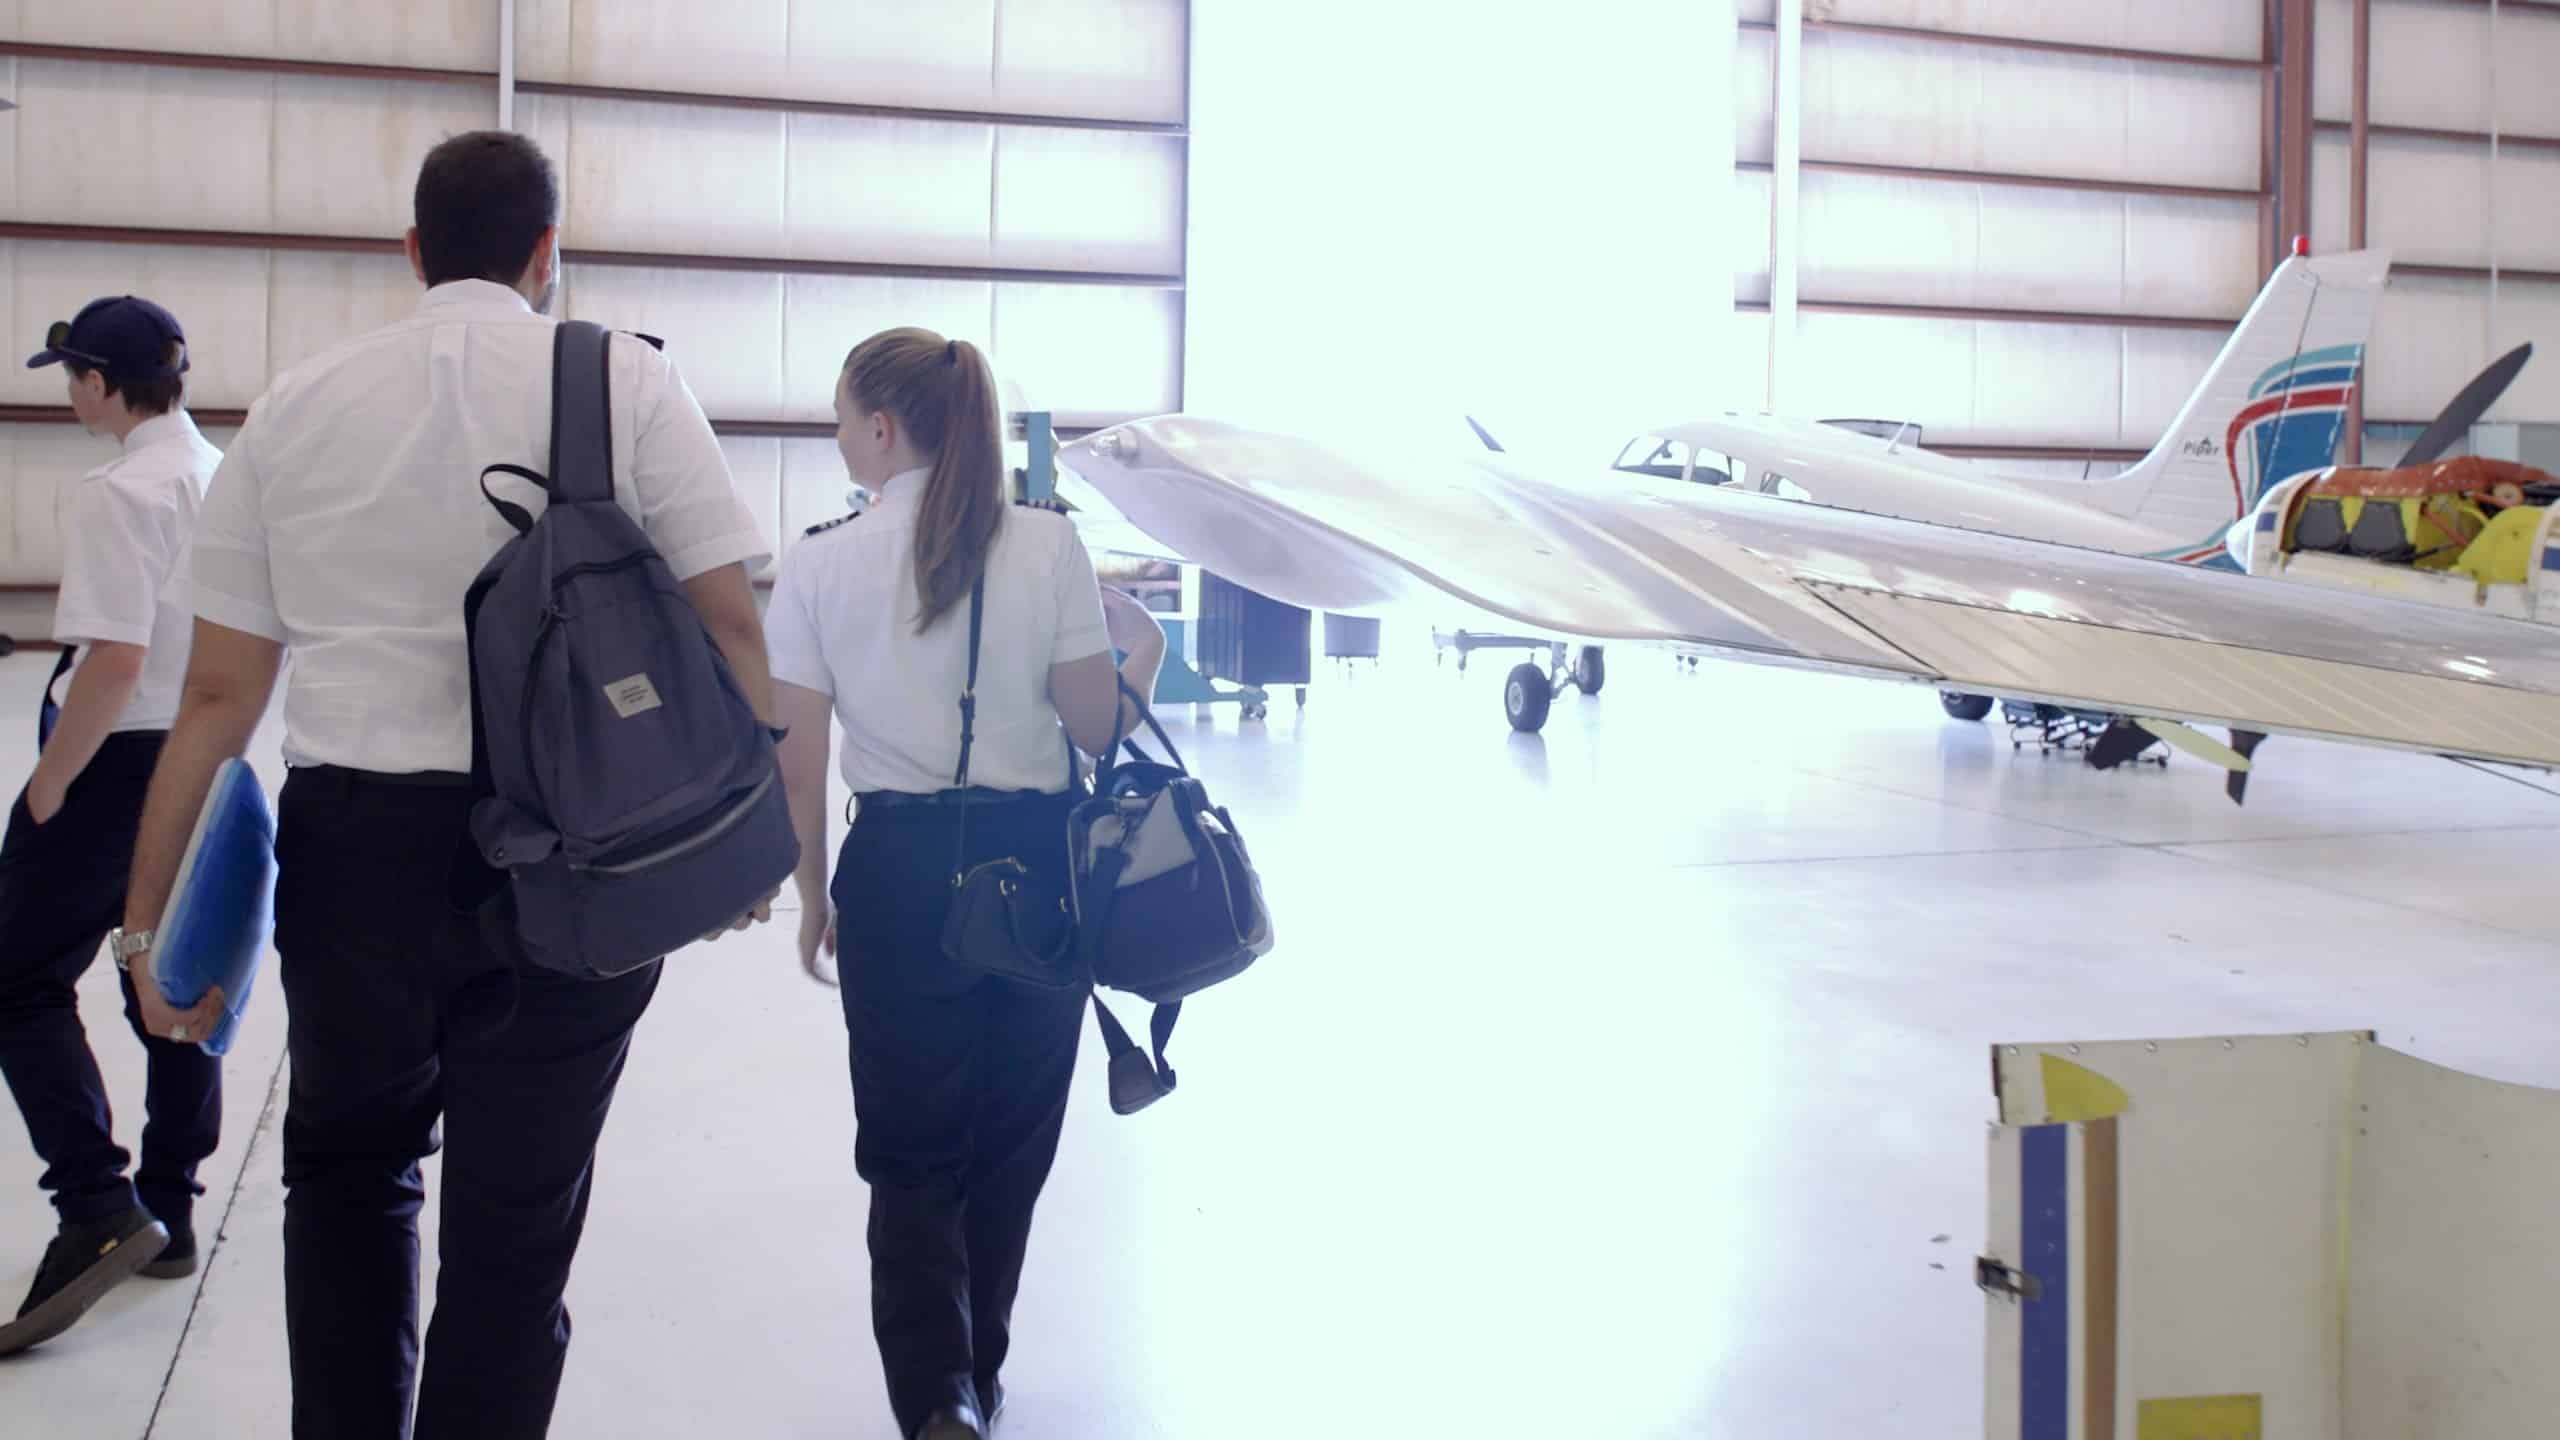 Paris Air flight students walking in a hangar with a small plane in the background